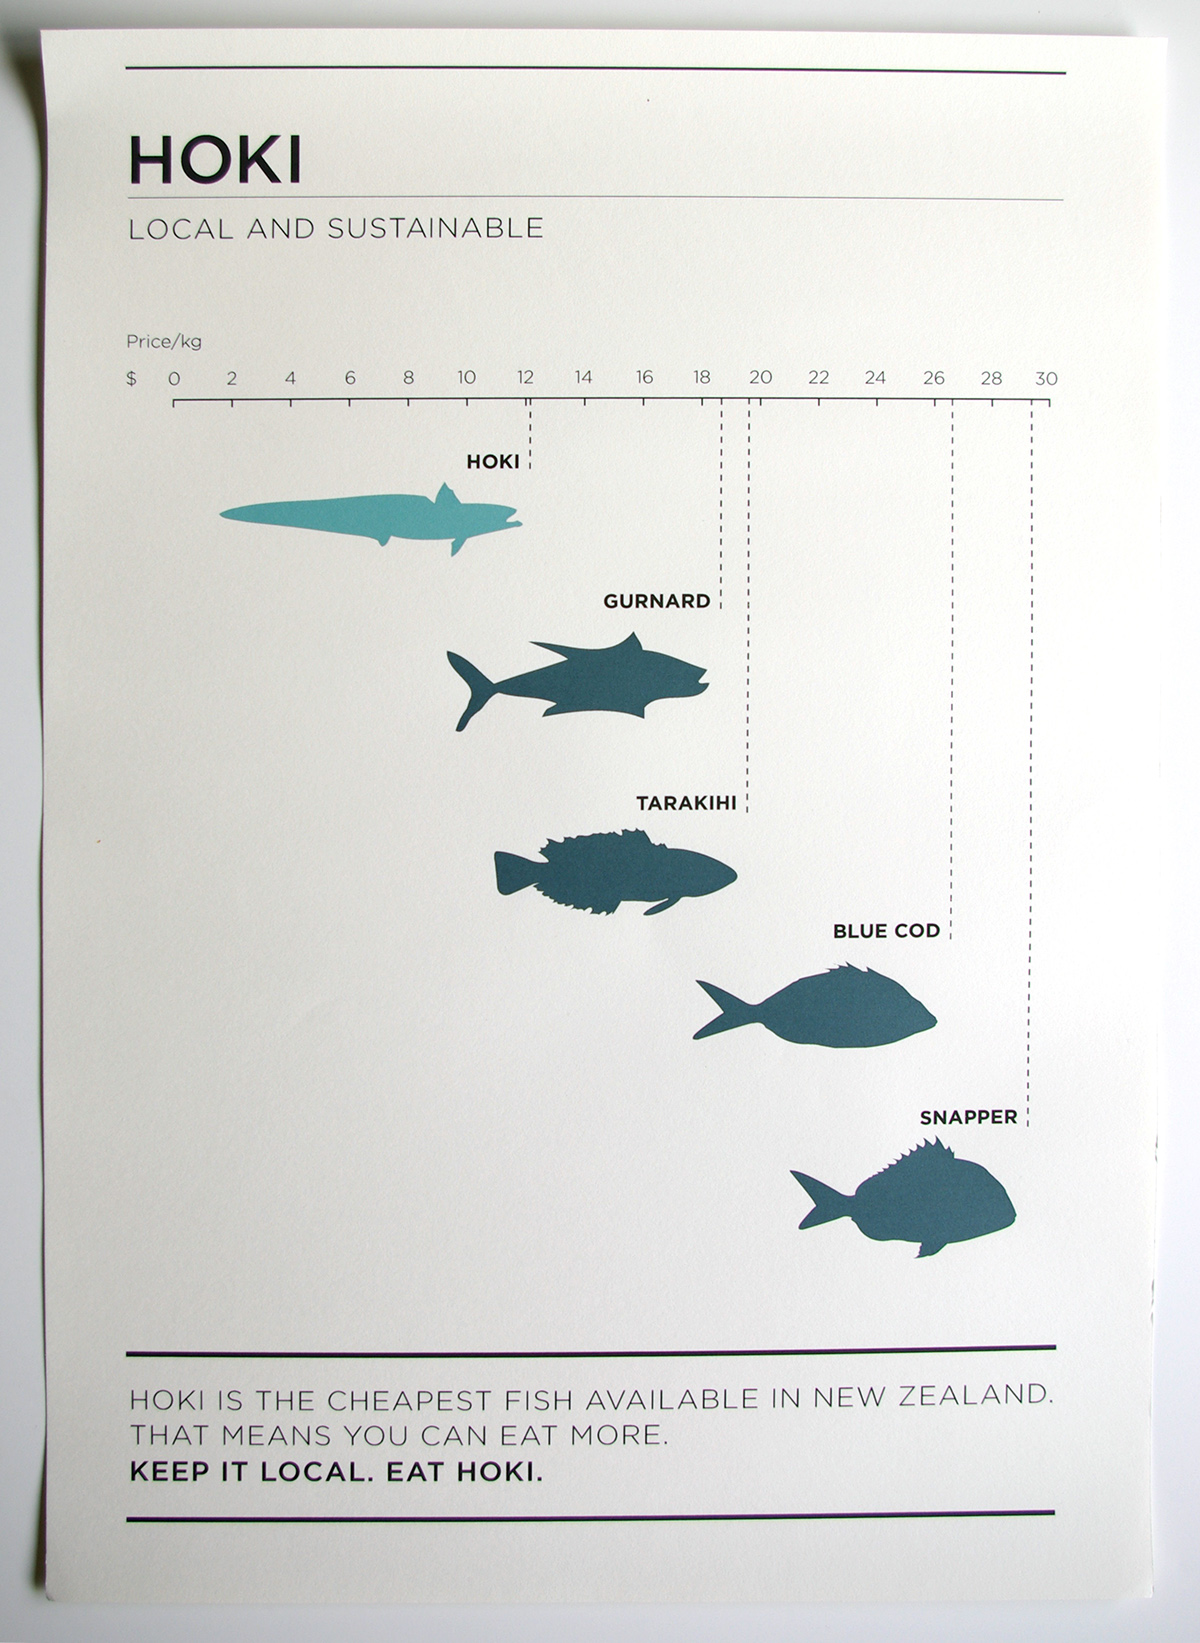 information design infographic Data data visualisation data visualization visualization information gotham fishing fishing industry seafood New Zealand student paper stock minimalist abstract fish rules